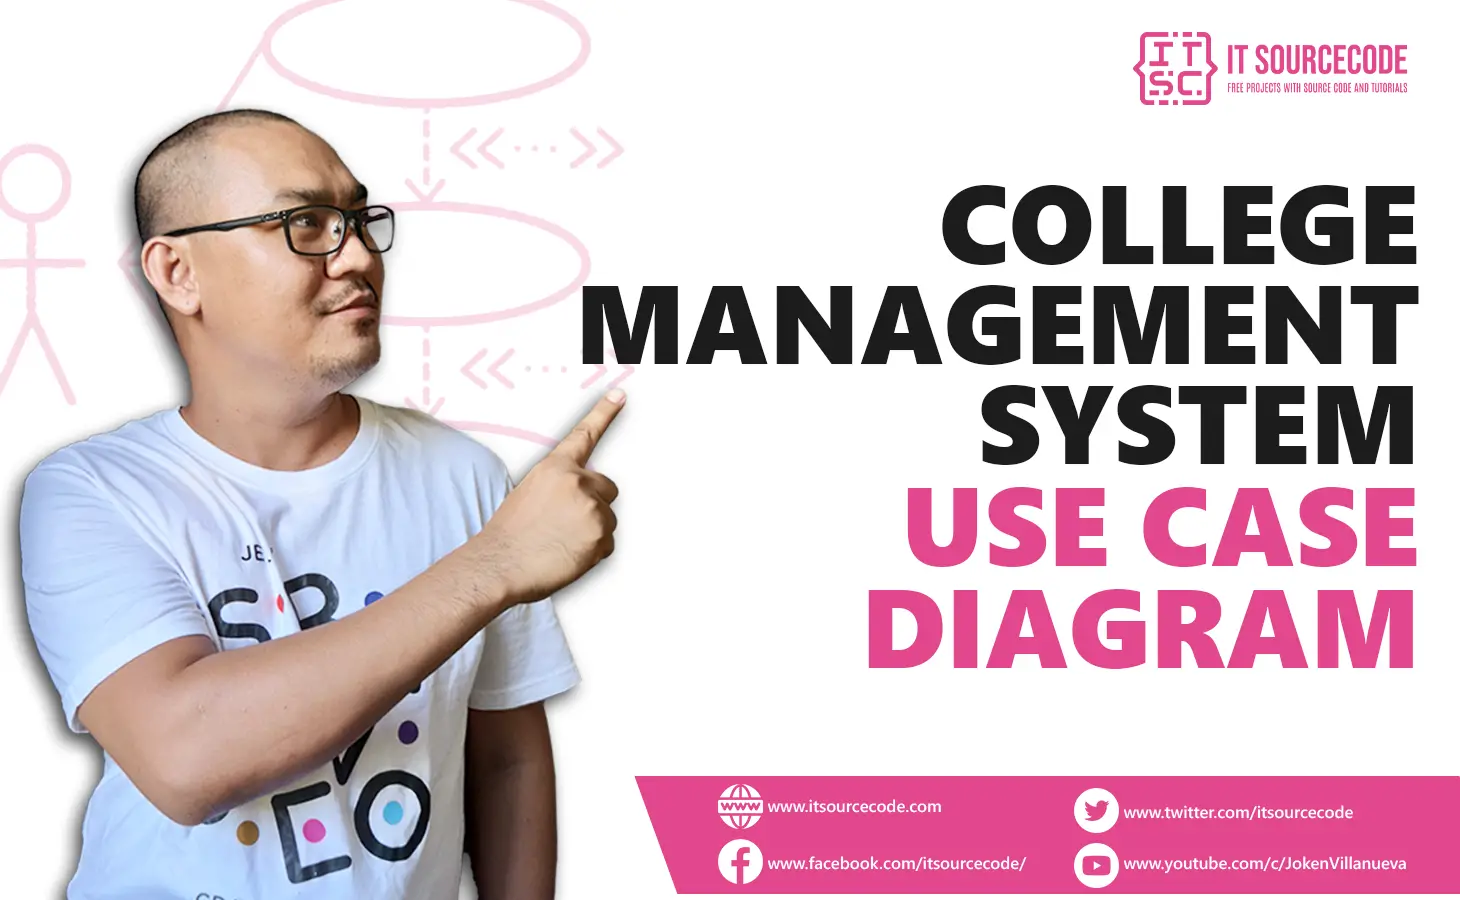 Use Case Diagram for College Management System